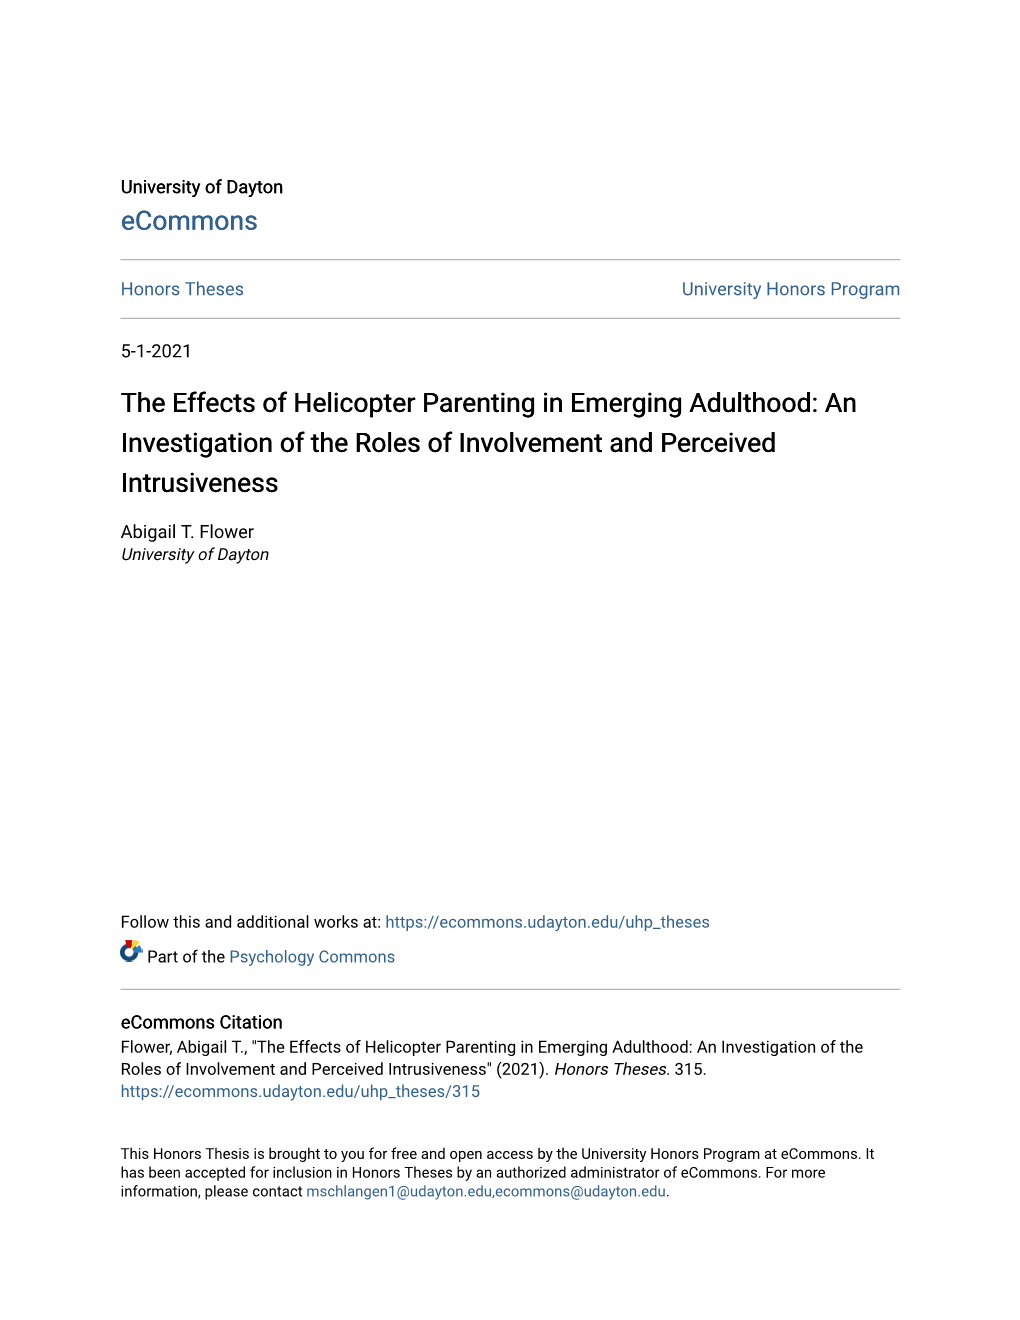 The Effects of Helicopter Parenting in Emerging Adulthood: an Investigation of the Roles of Involvement and Perceived Intrusiveness